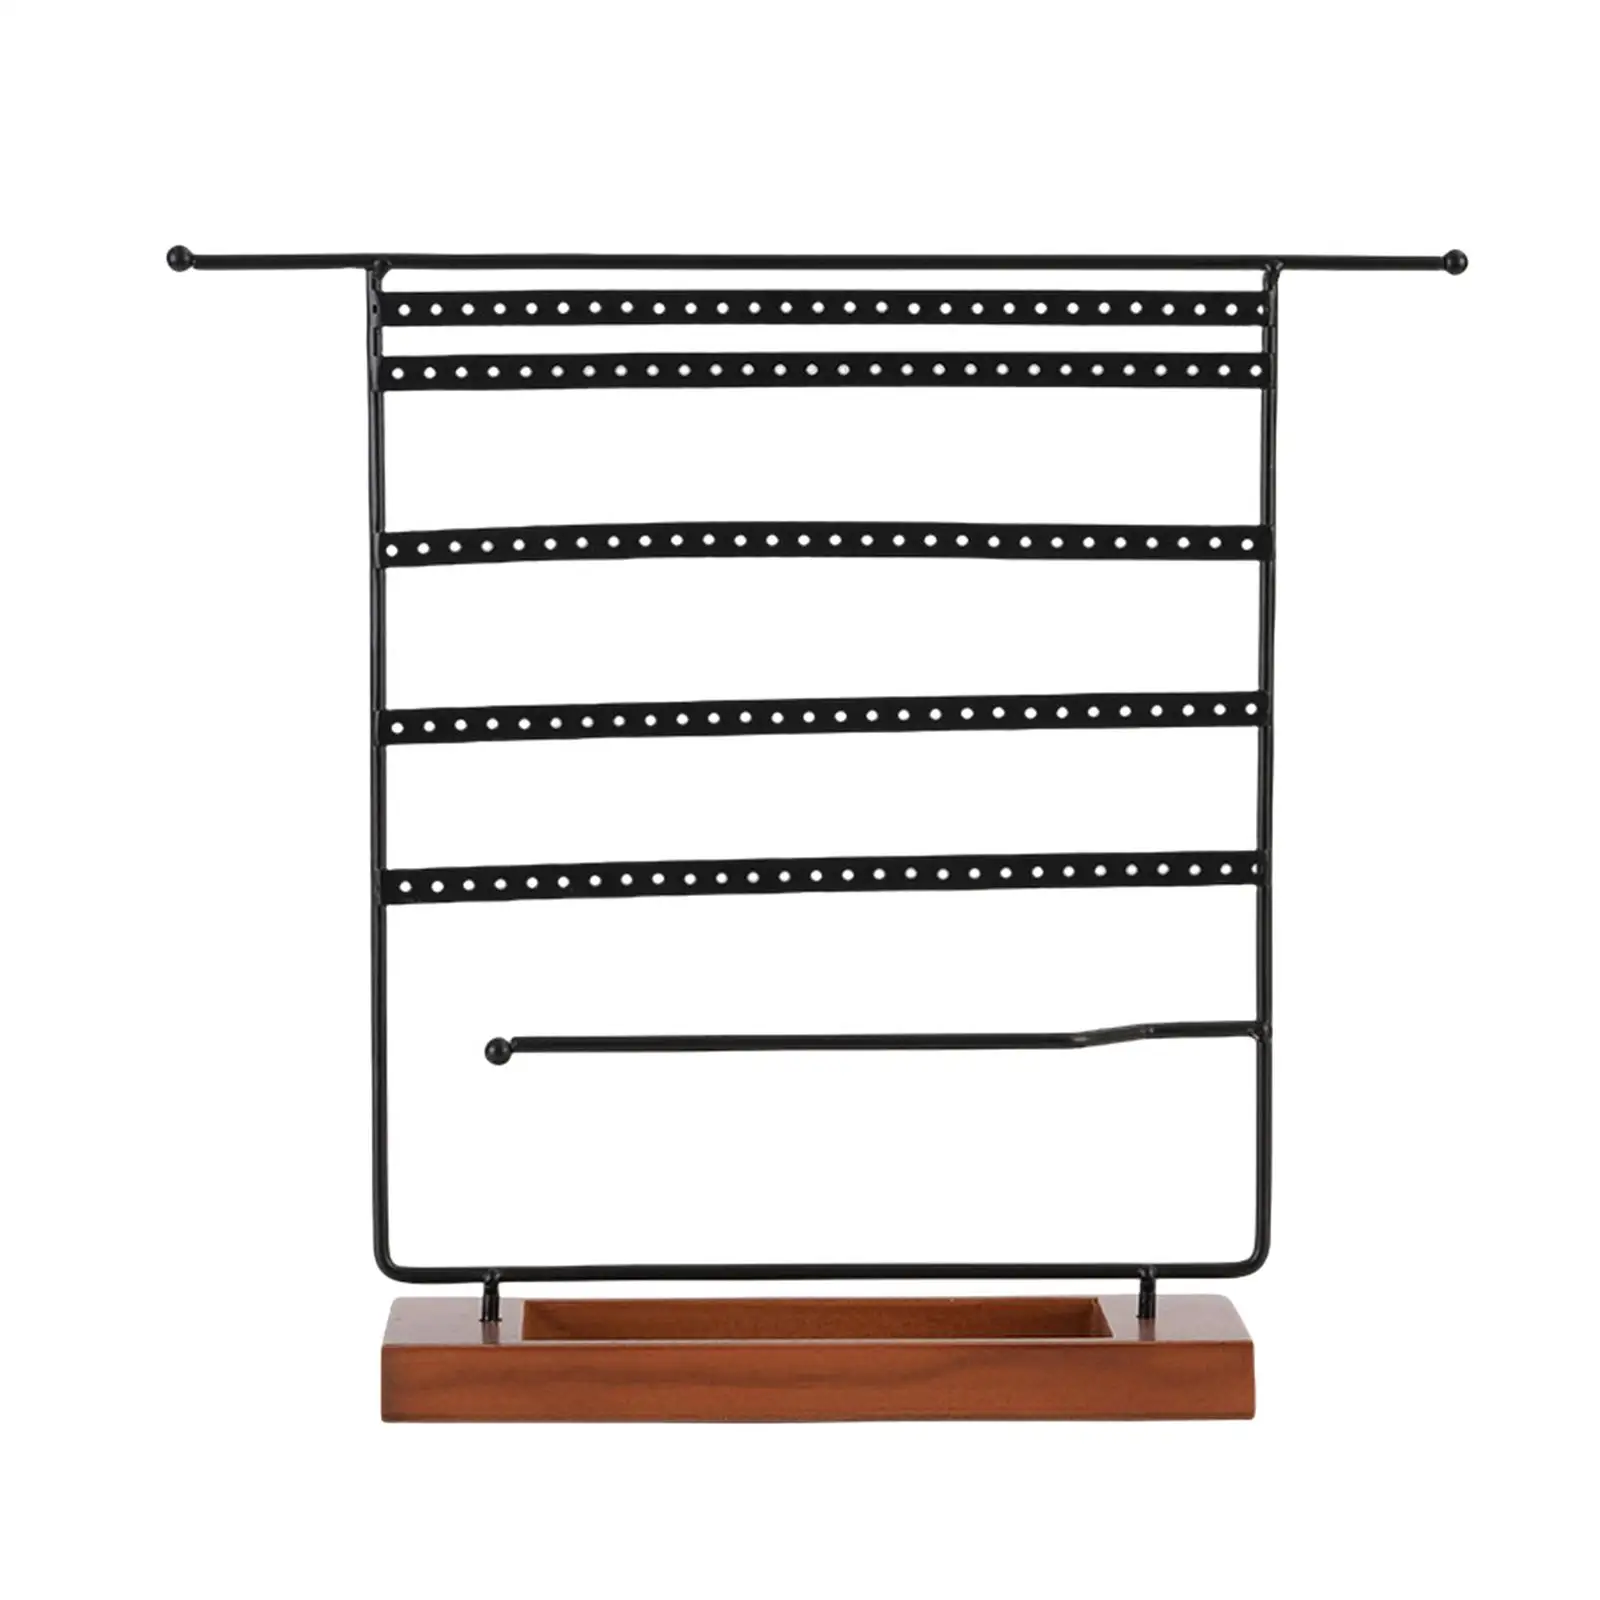 7 Tier Metal Jewelry Holder Hanging Storage Display Free Standing Necklace Holder Display Earring Holder for Tabletop Countertop